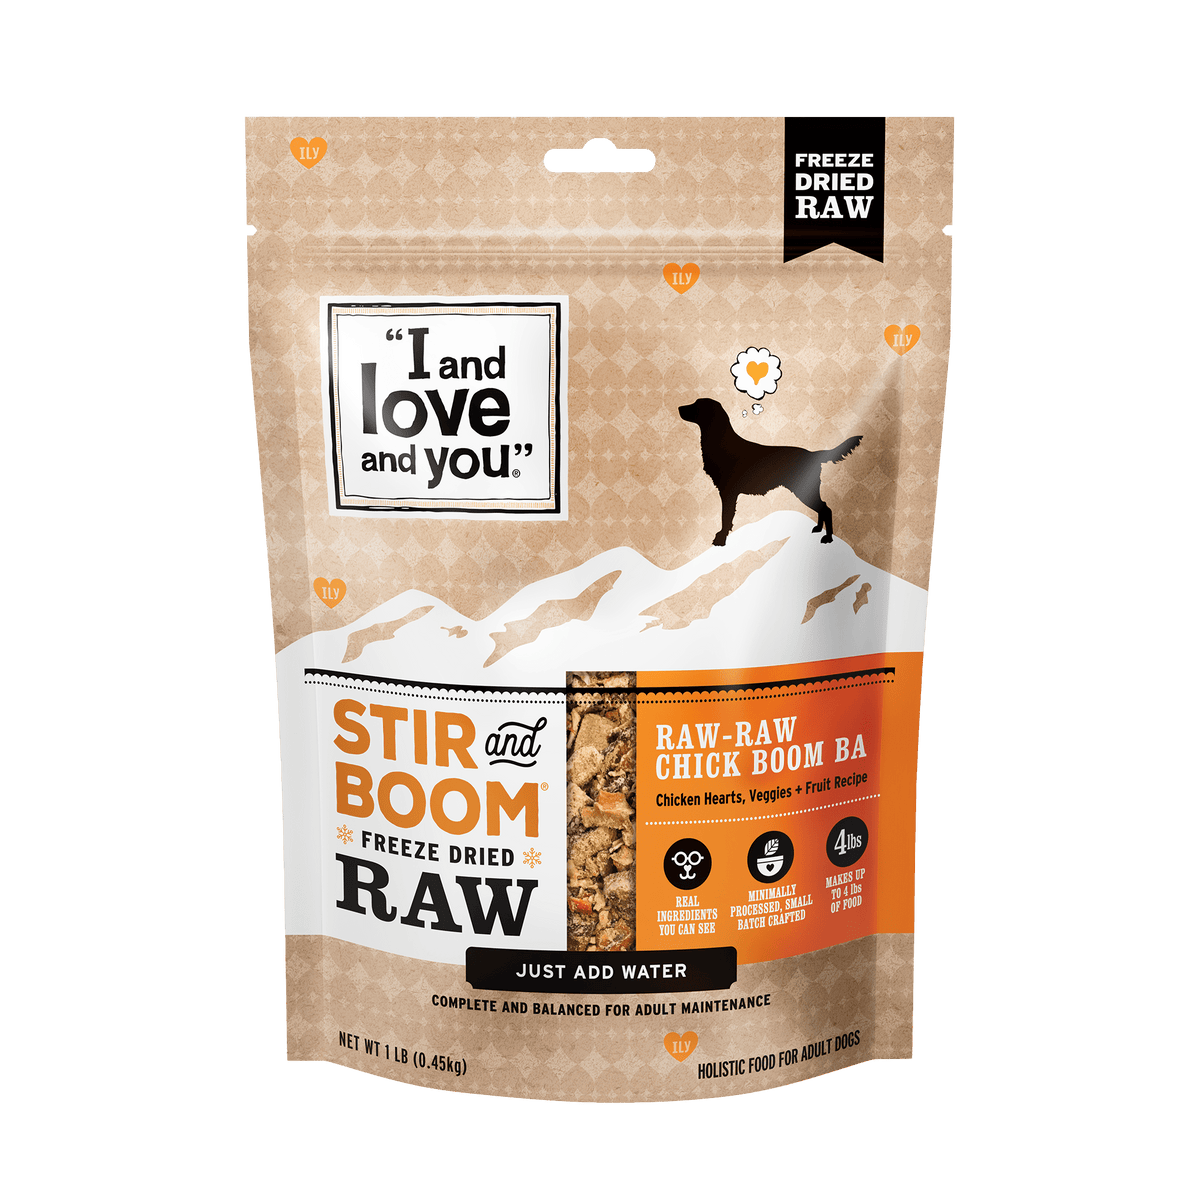 Stir & Boom - Raw Raw Chick Boom Ba packaging with dog food bag and silhouette of a dog.